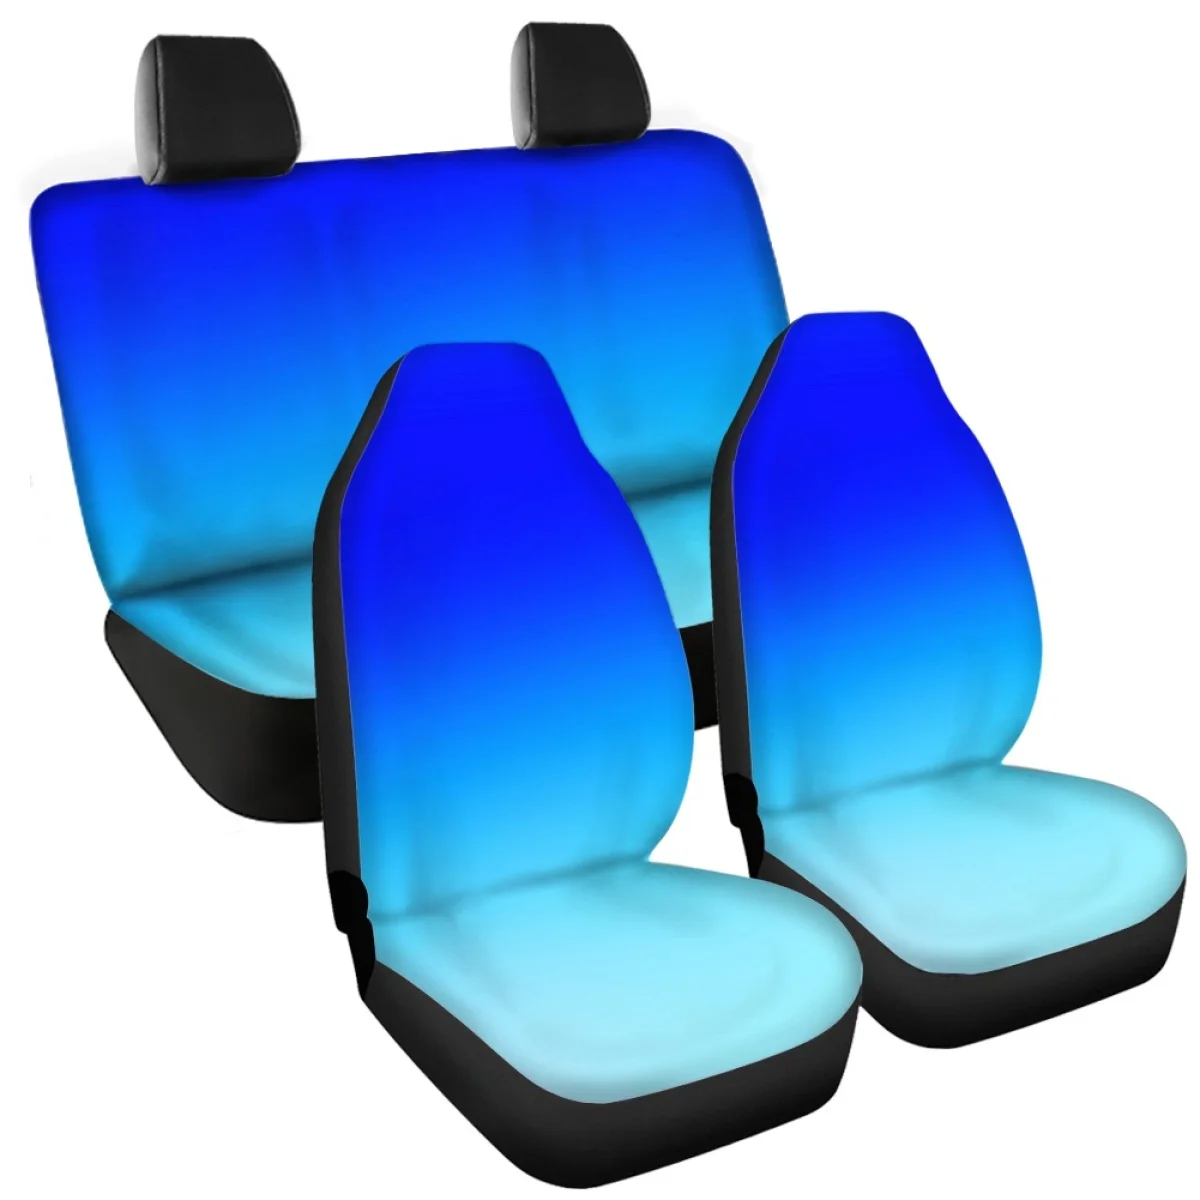 https://ae01.alicdn.com/kf/S72344d1fb2c1466bbc1546f28f46ff07o/Custom-Your-Logo-Image-Print-On-Demand-Front-Back-Seat-Cover-4PCS-Set-Auto-Seat-Protector.jpg